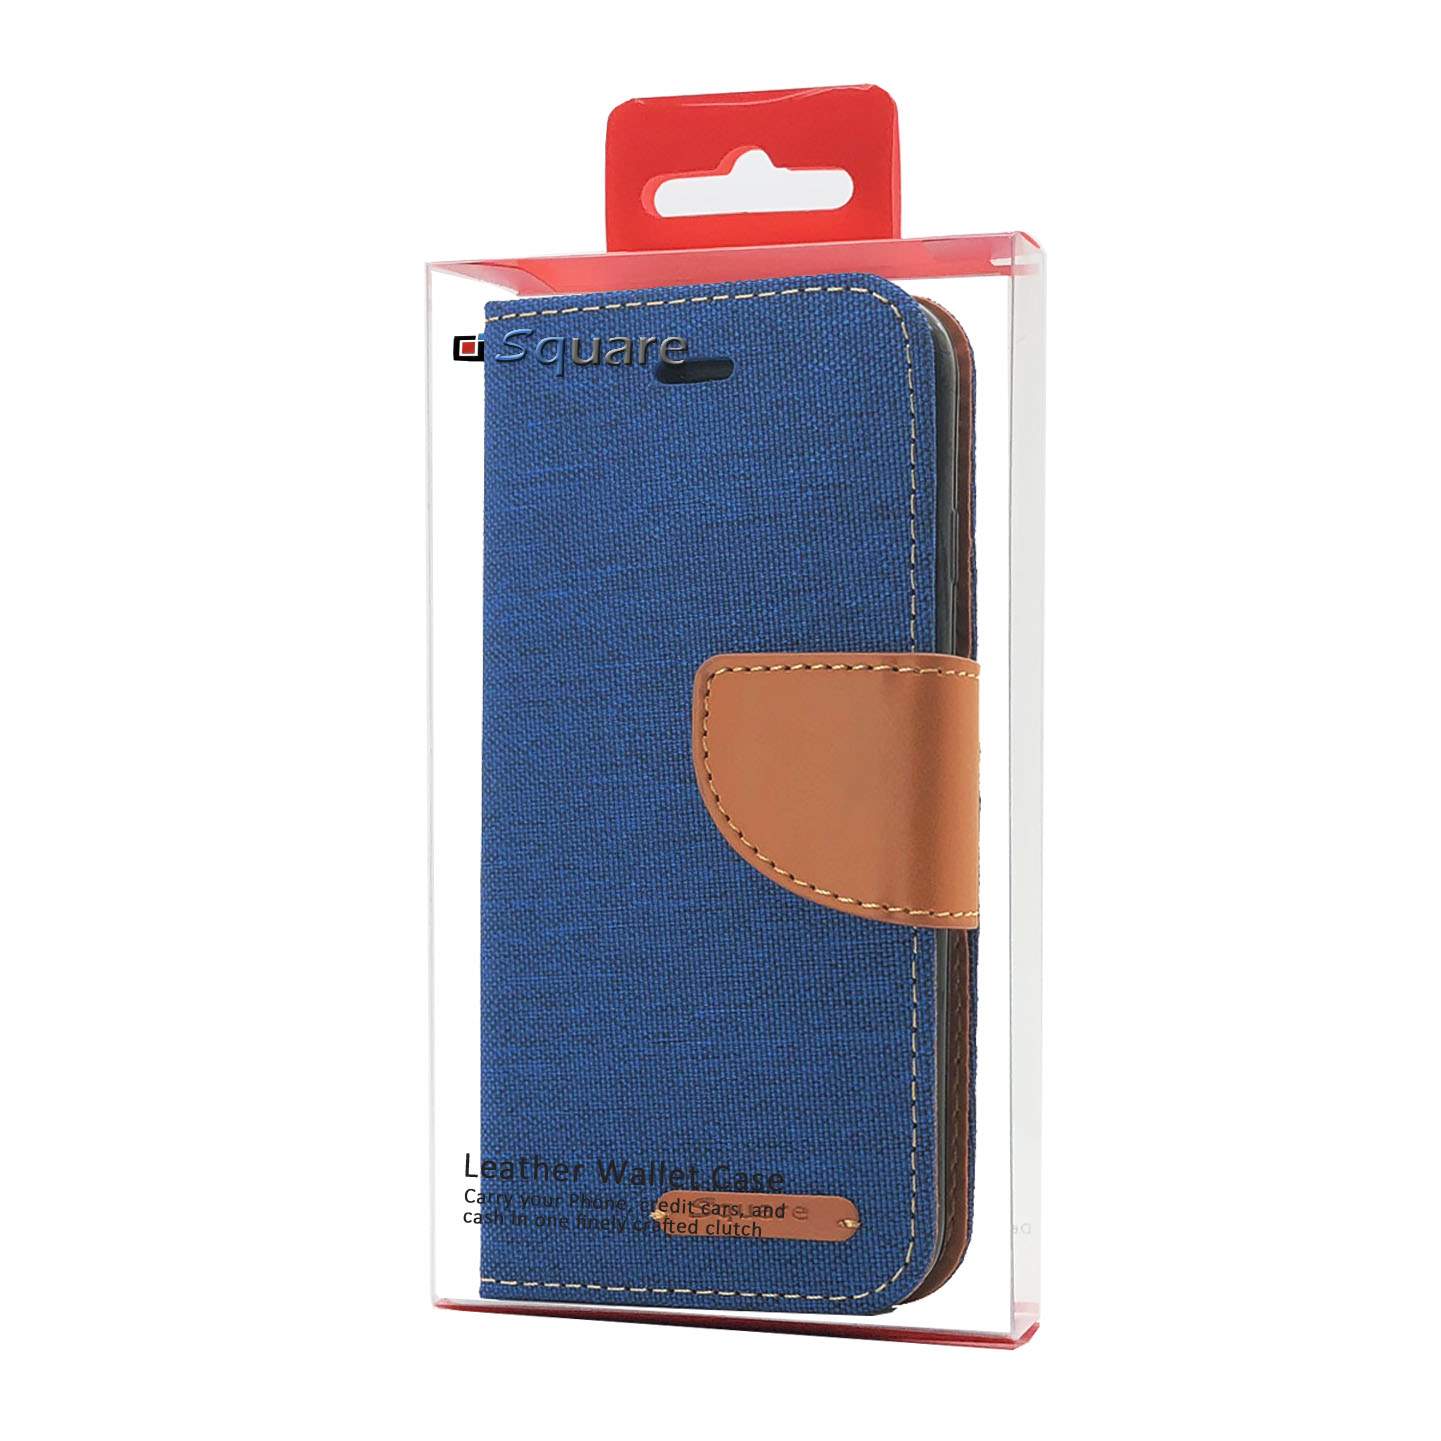 Mesh wallet Case for iPhone 11 Pro Max (blue)